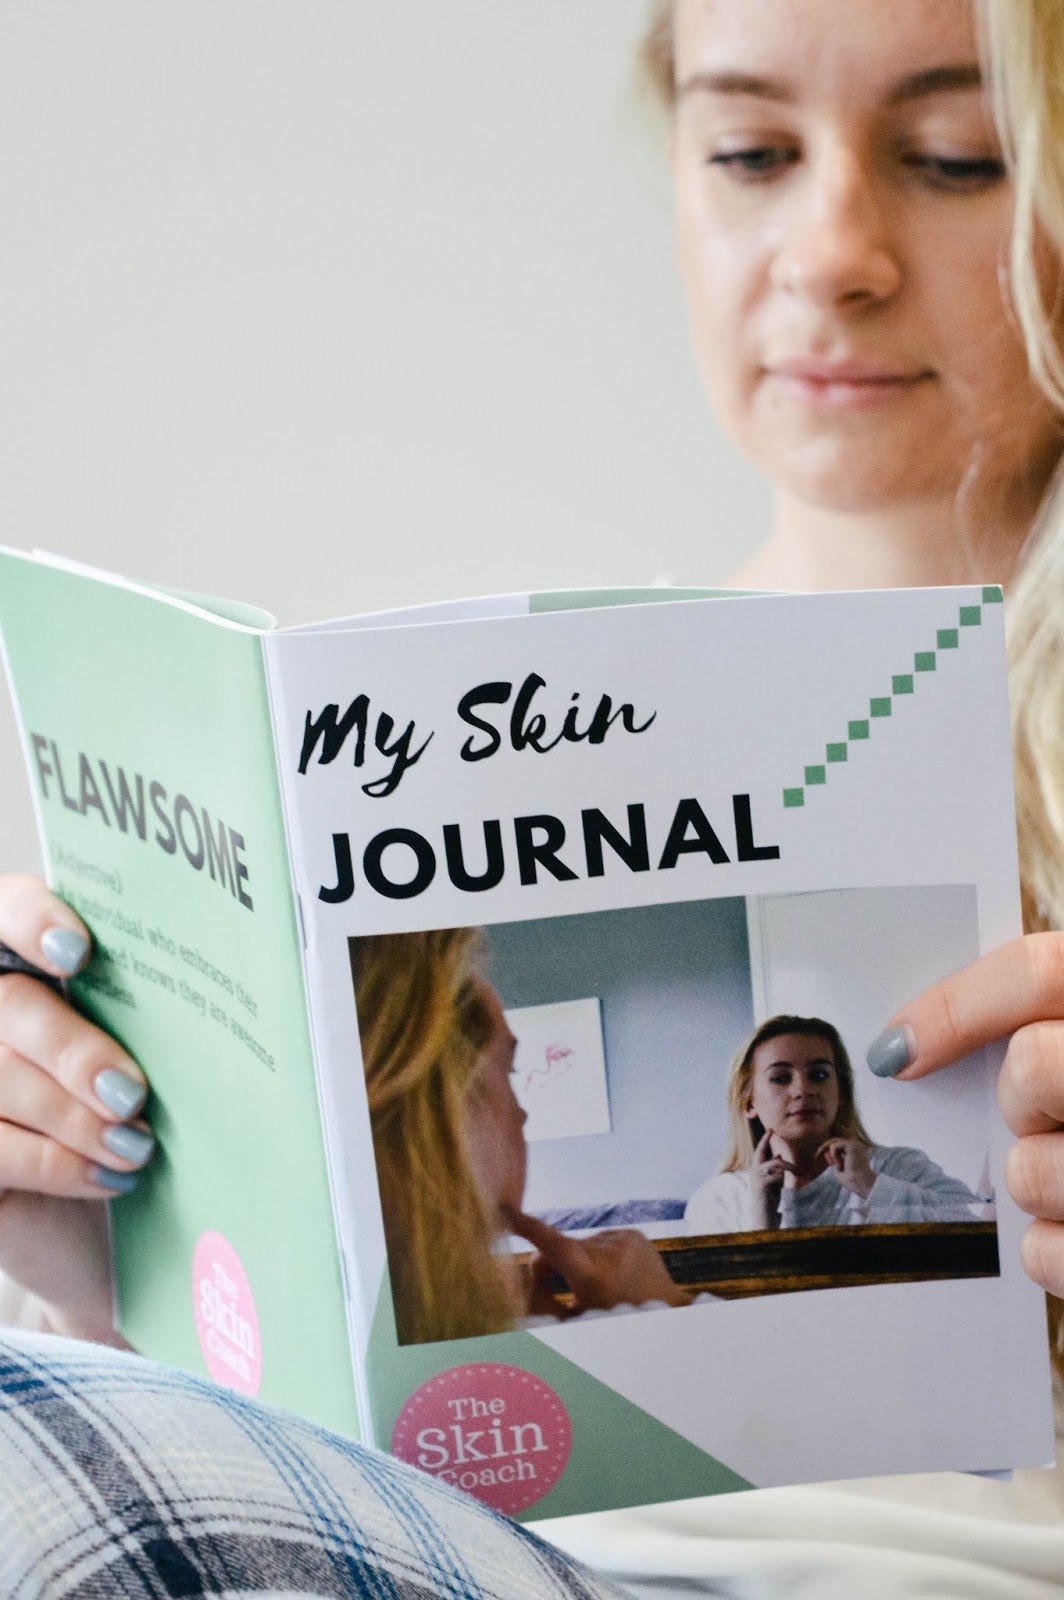 The Skin Journal by The Skin Coach | Hampshire Lifestyle Blog